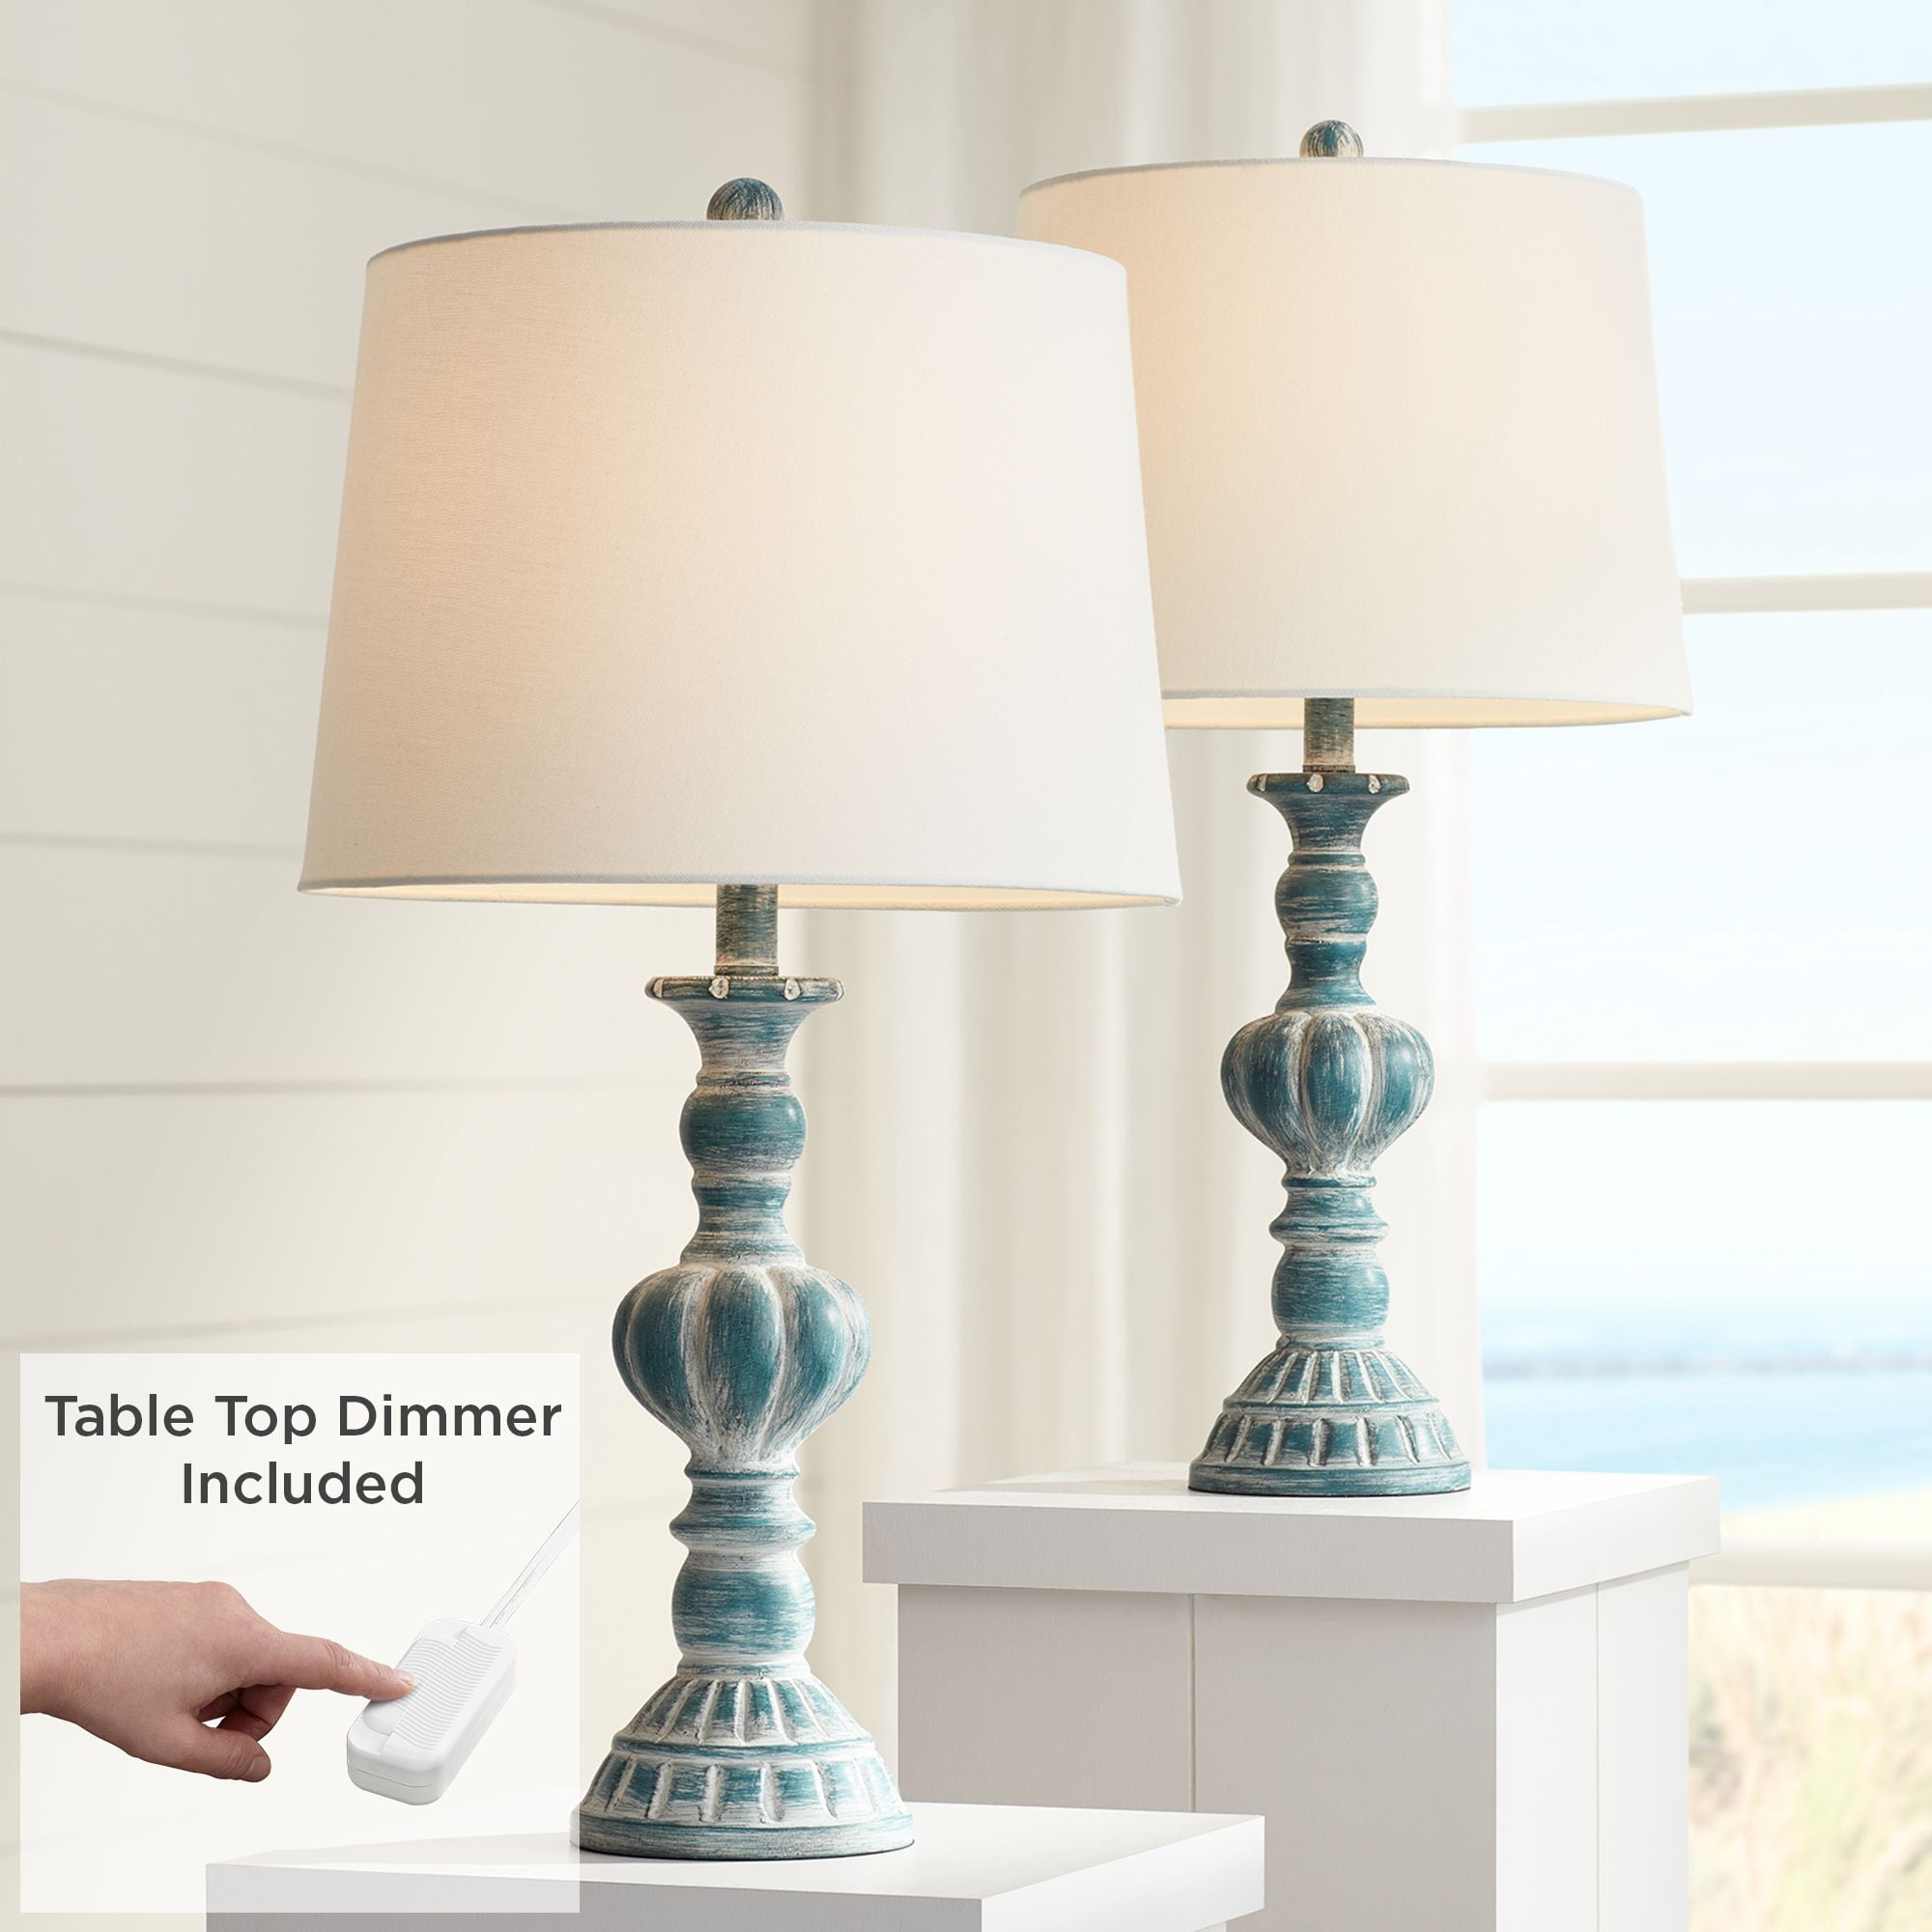 Coastal Vintage Table Lamps, Vintage Blue And White Table Lamps